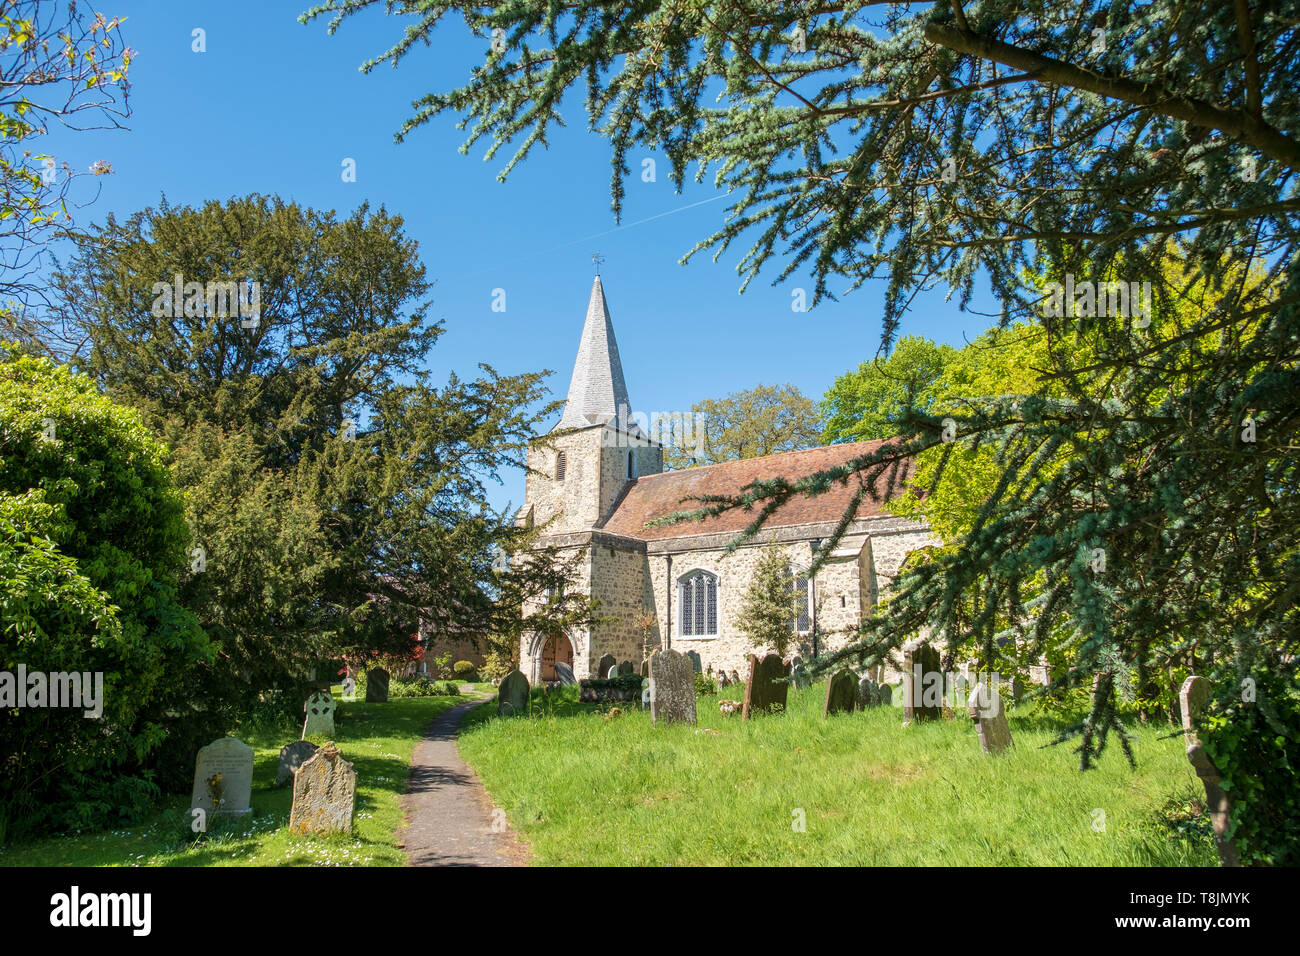 The Picturesque St Nicholas' Church Pluckley Kent, UK, where scenes for the popular TV series 'The Darling Buds of May' were filmed Stock Photo